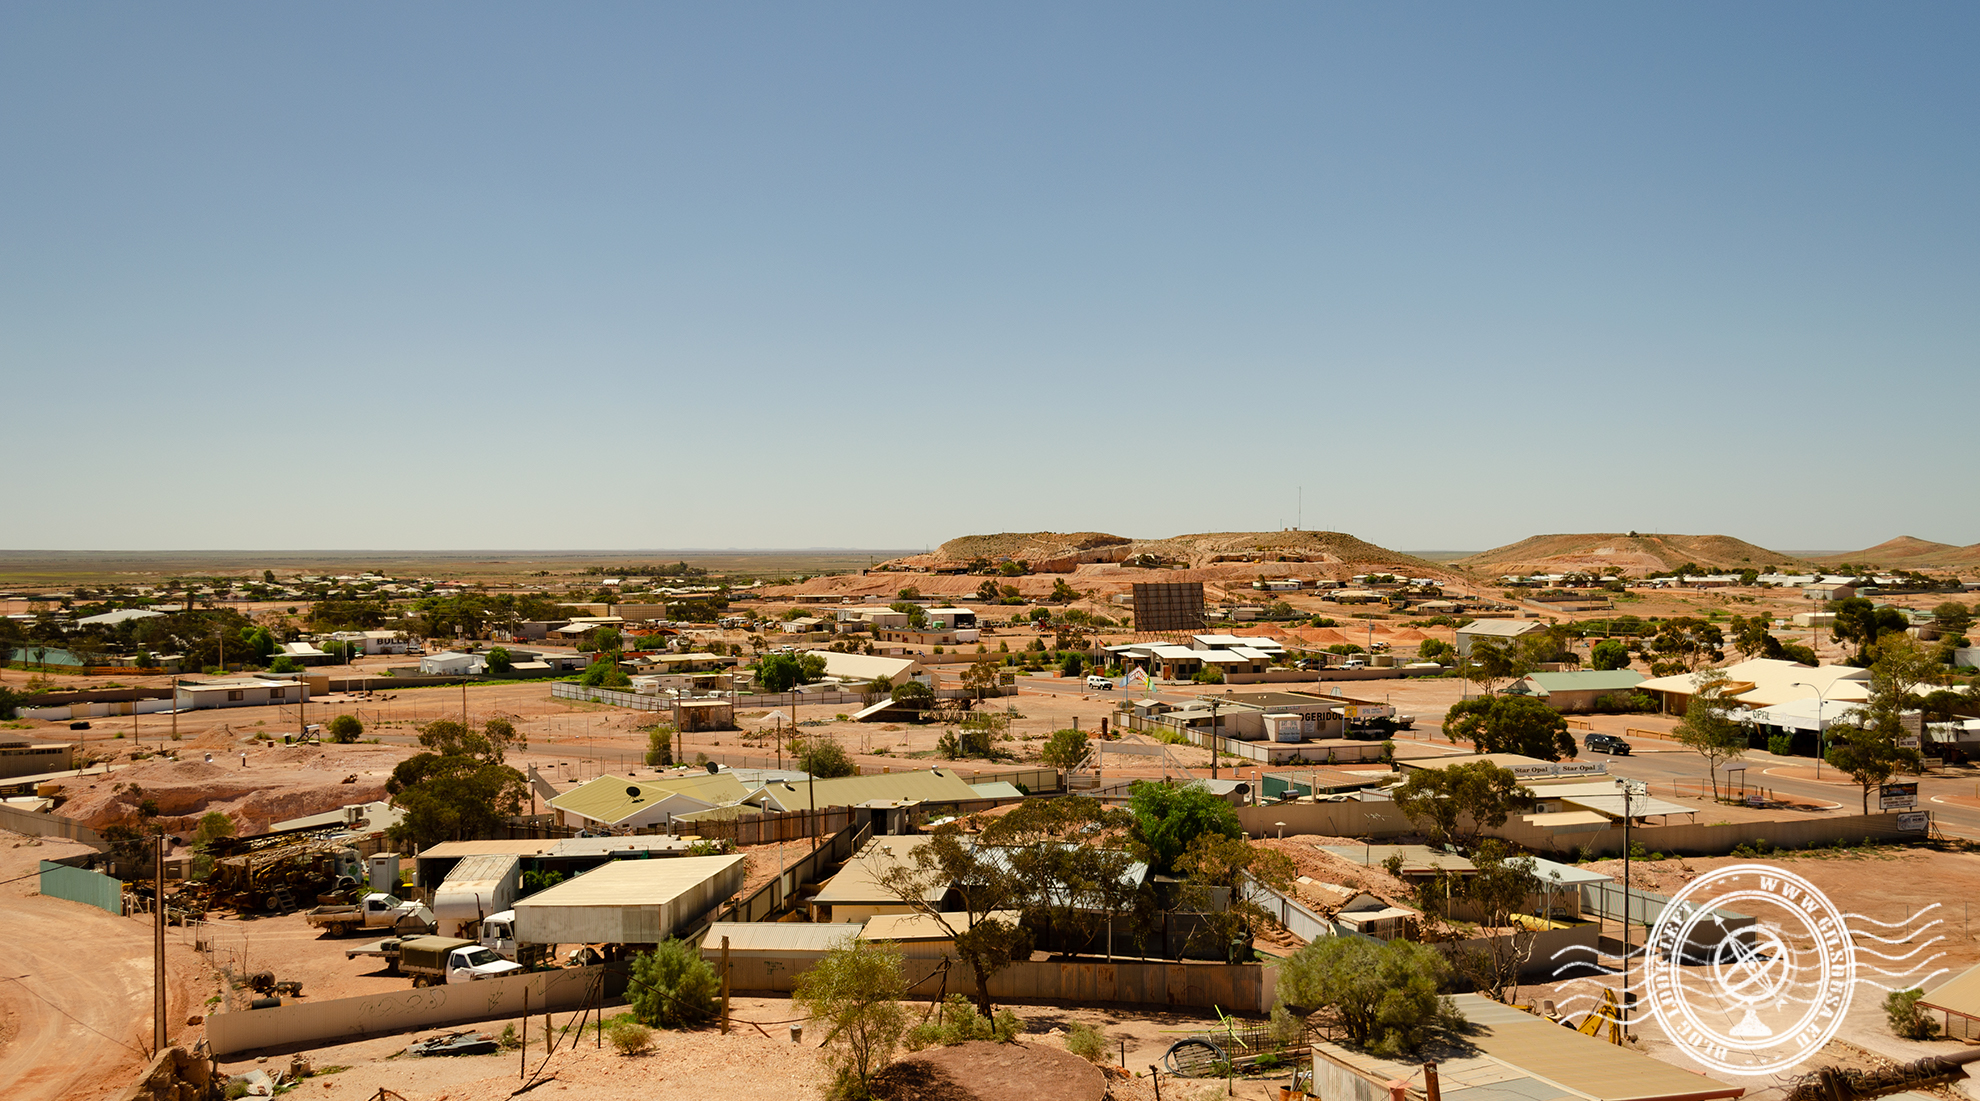 Coober Pedy, famous for the opals mines in the center of Australia